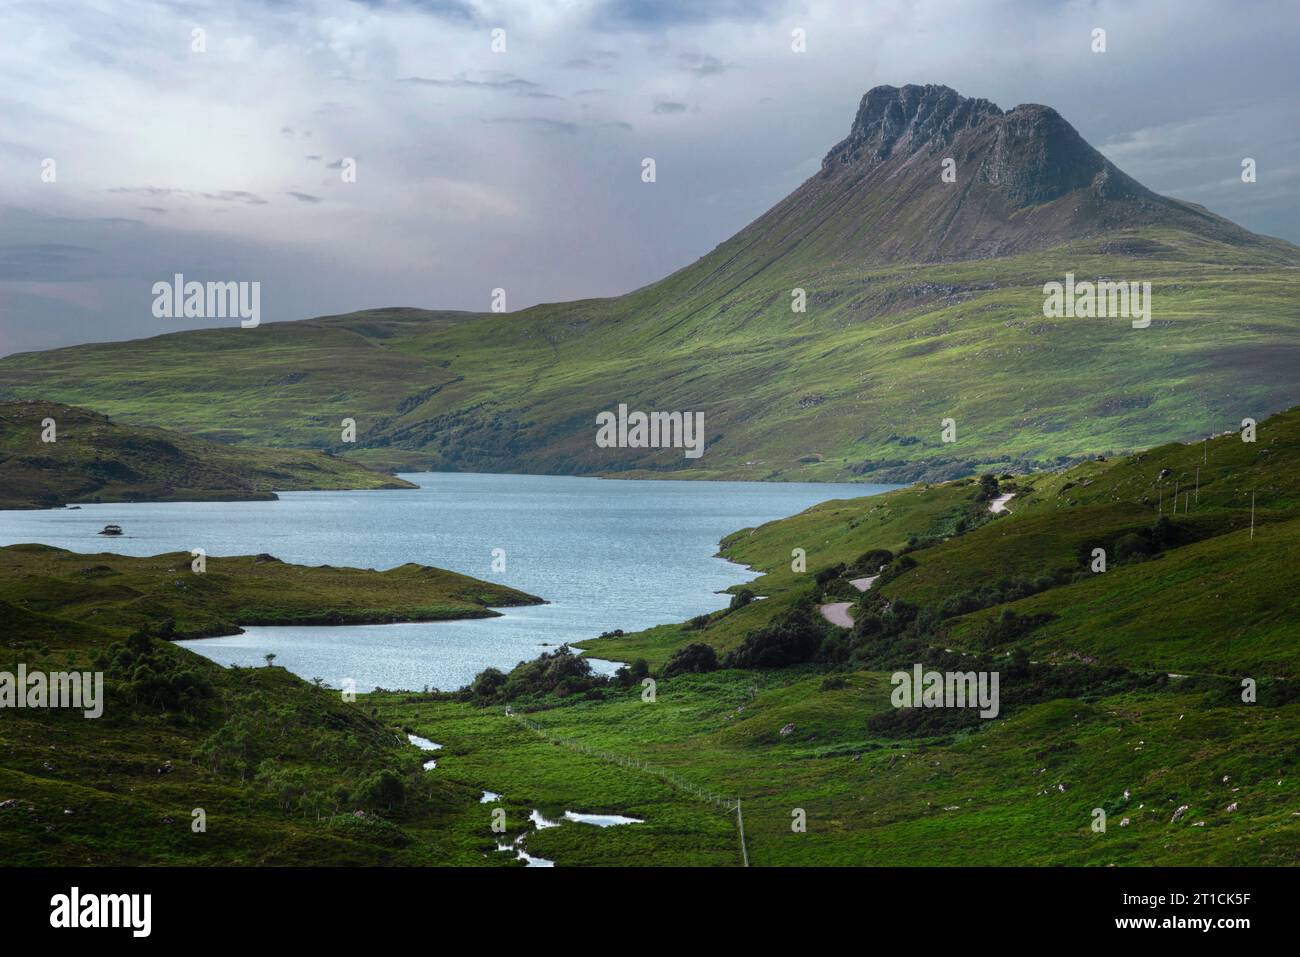 Stac Pollaidh is a distinctive mountain located in the Assynt region of Sutherland, Scotland. Stock Photo